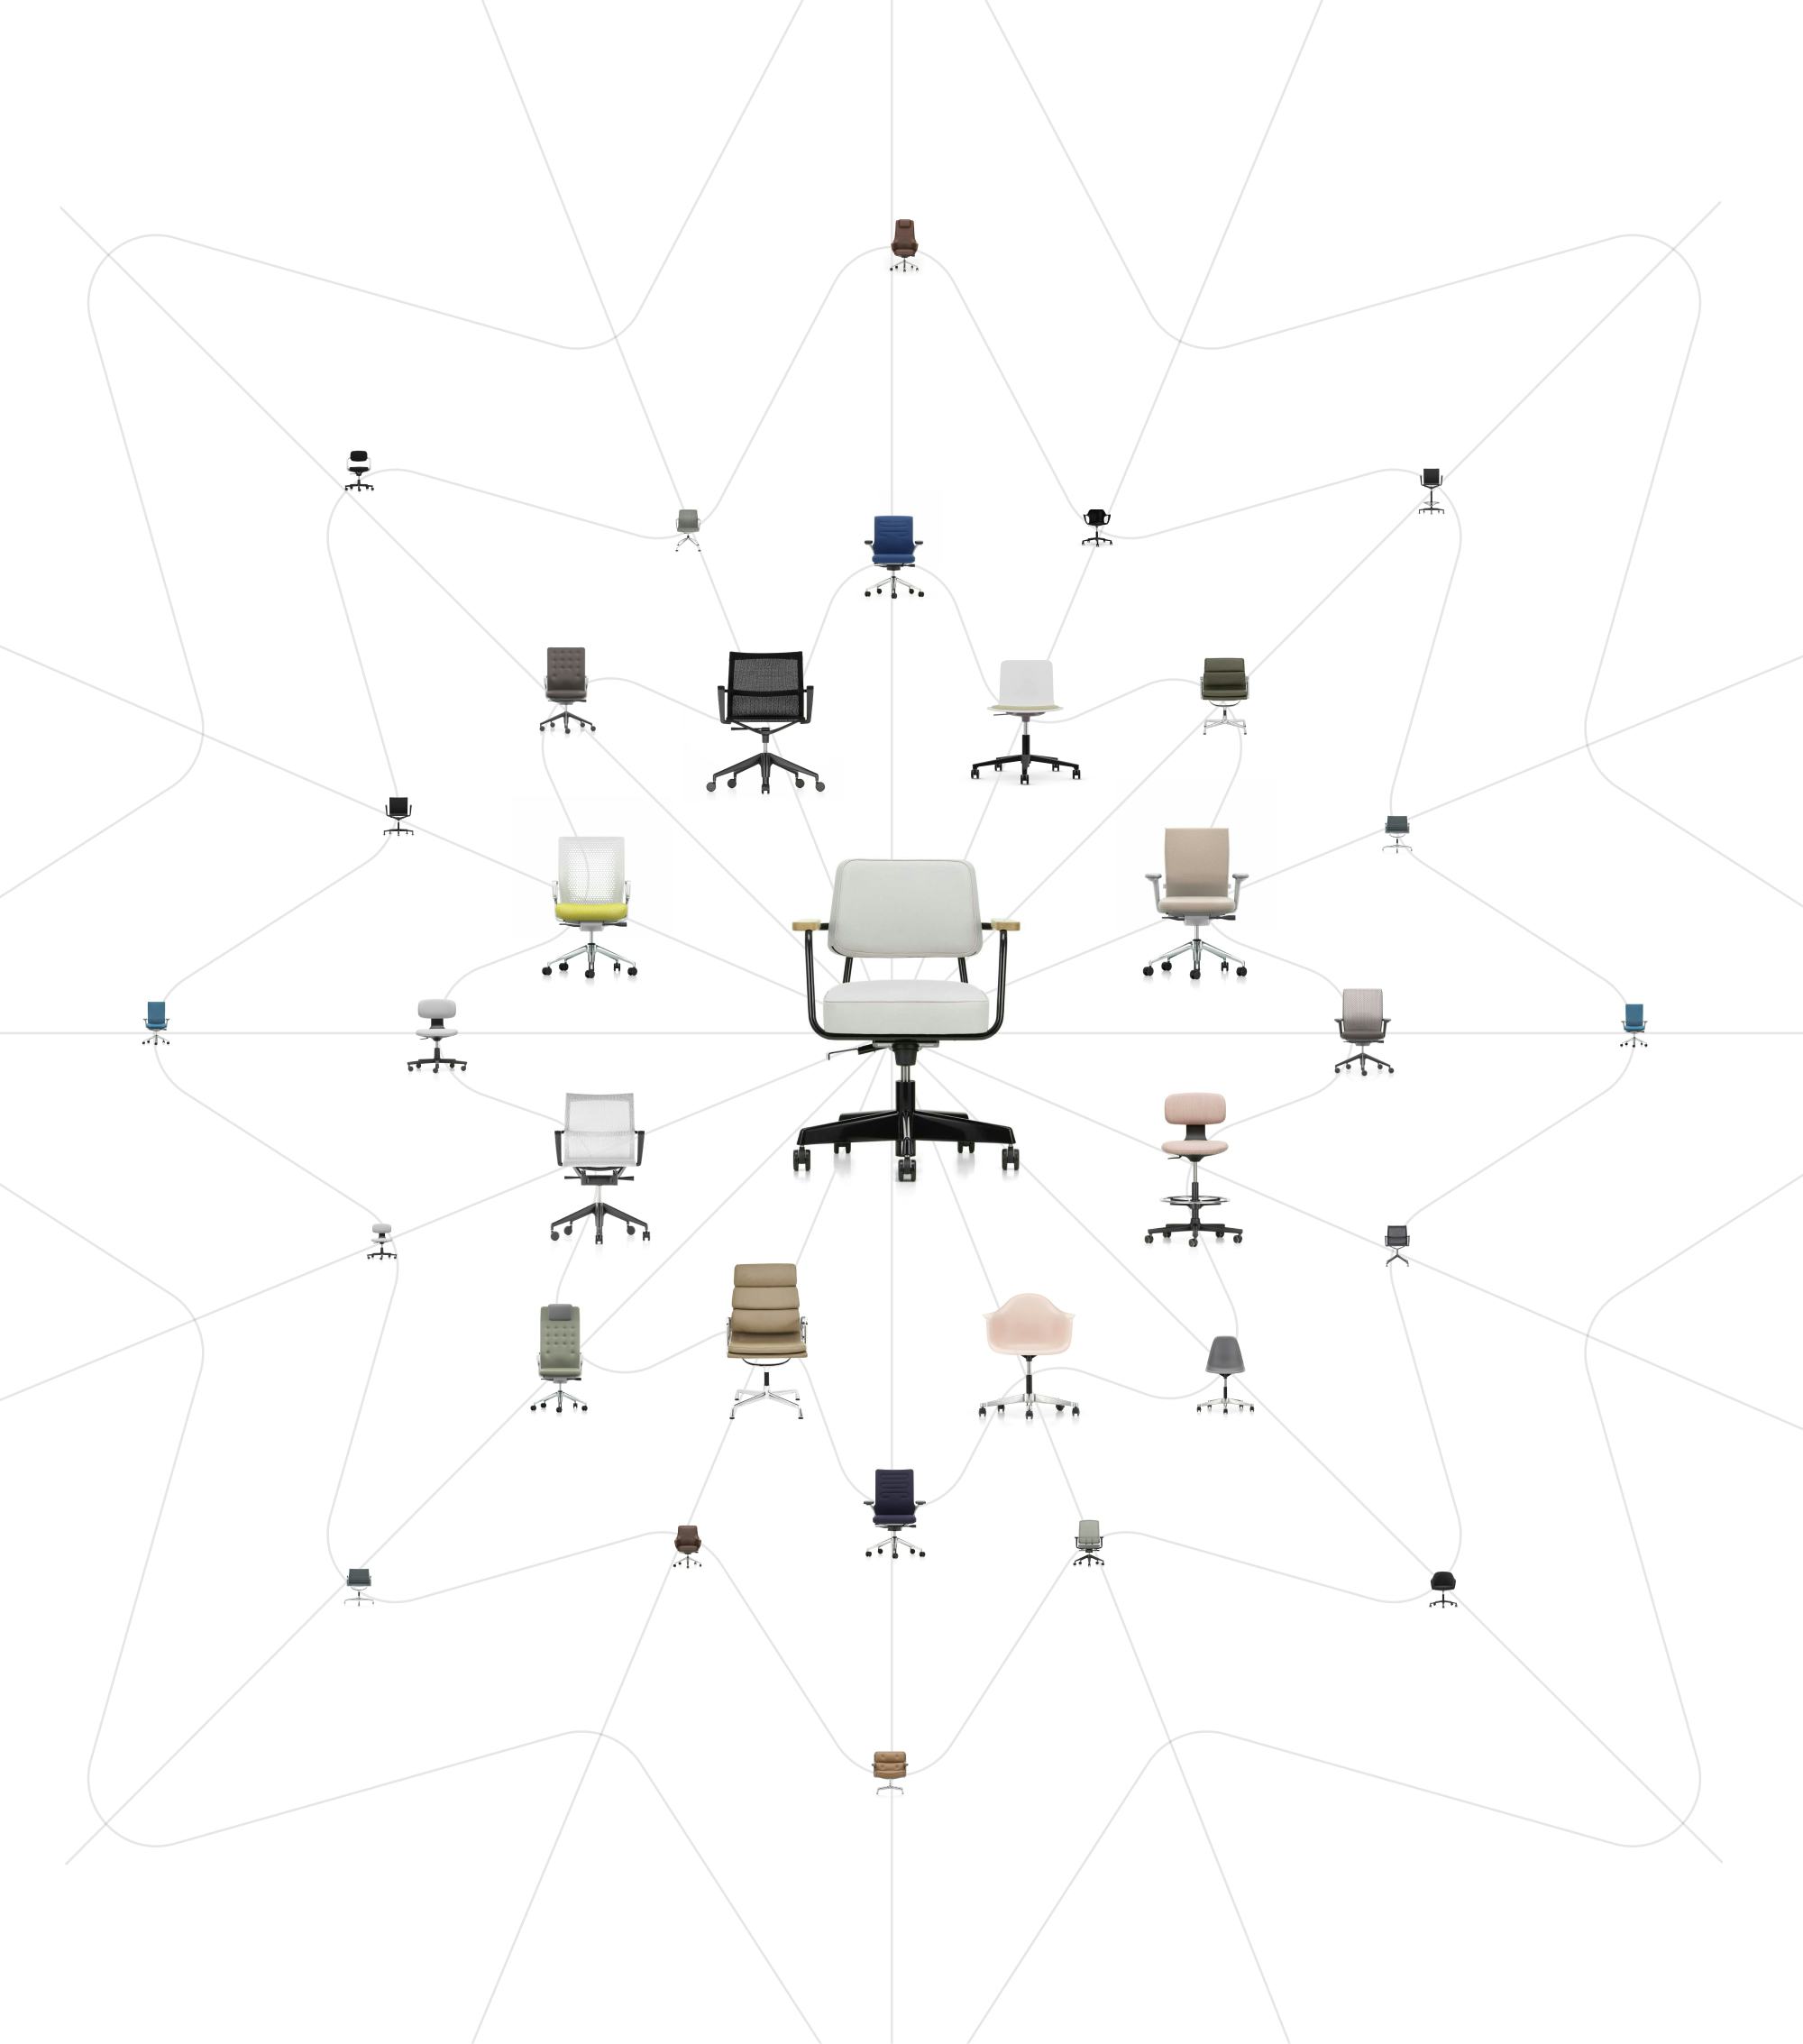 The chair finder grid and it's underlying structure